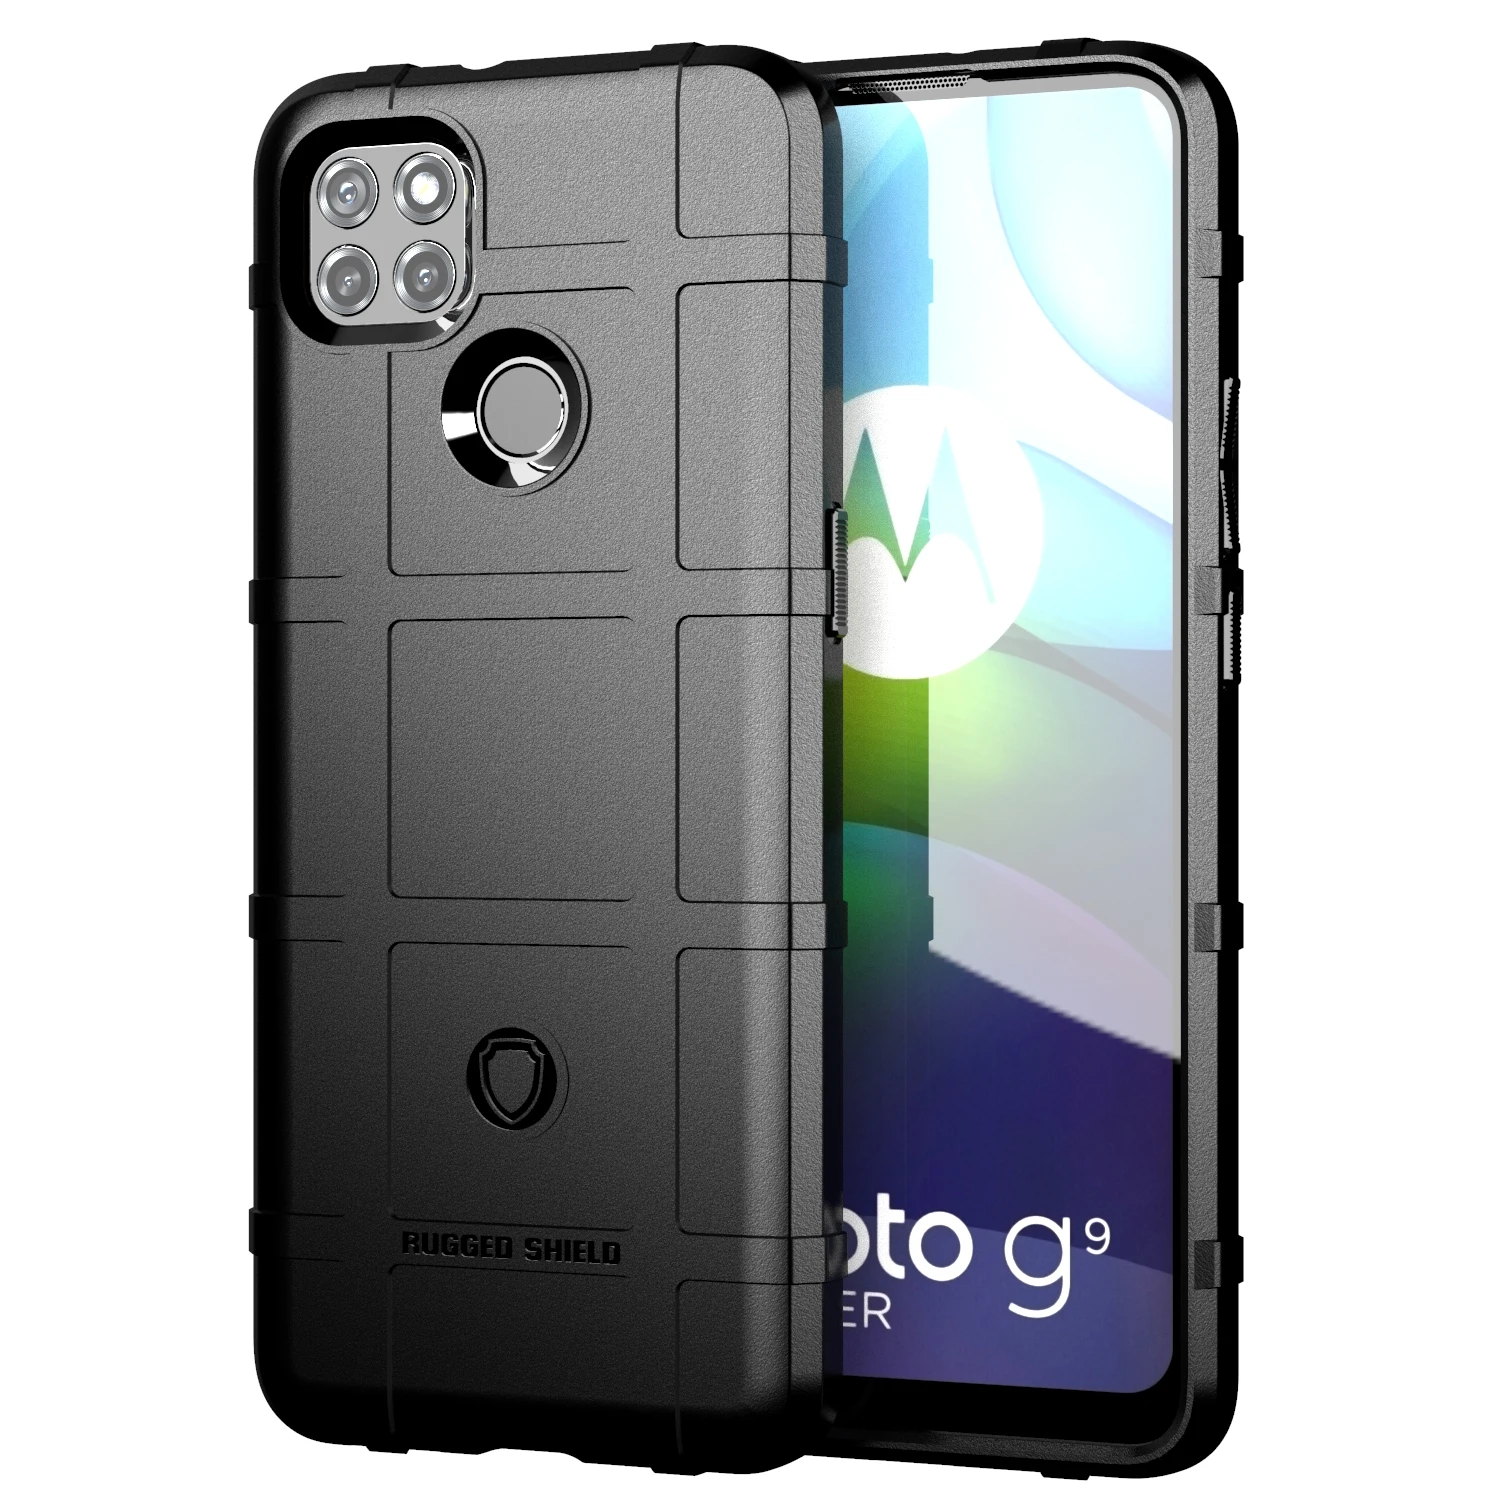 

Armor Rubber Case for Moto G9 Power g9+ Motorola G9 plus Shockproof Shield Cover for moto g9 play Anti-Slip Grid Silicone Cases